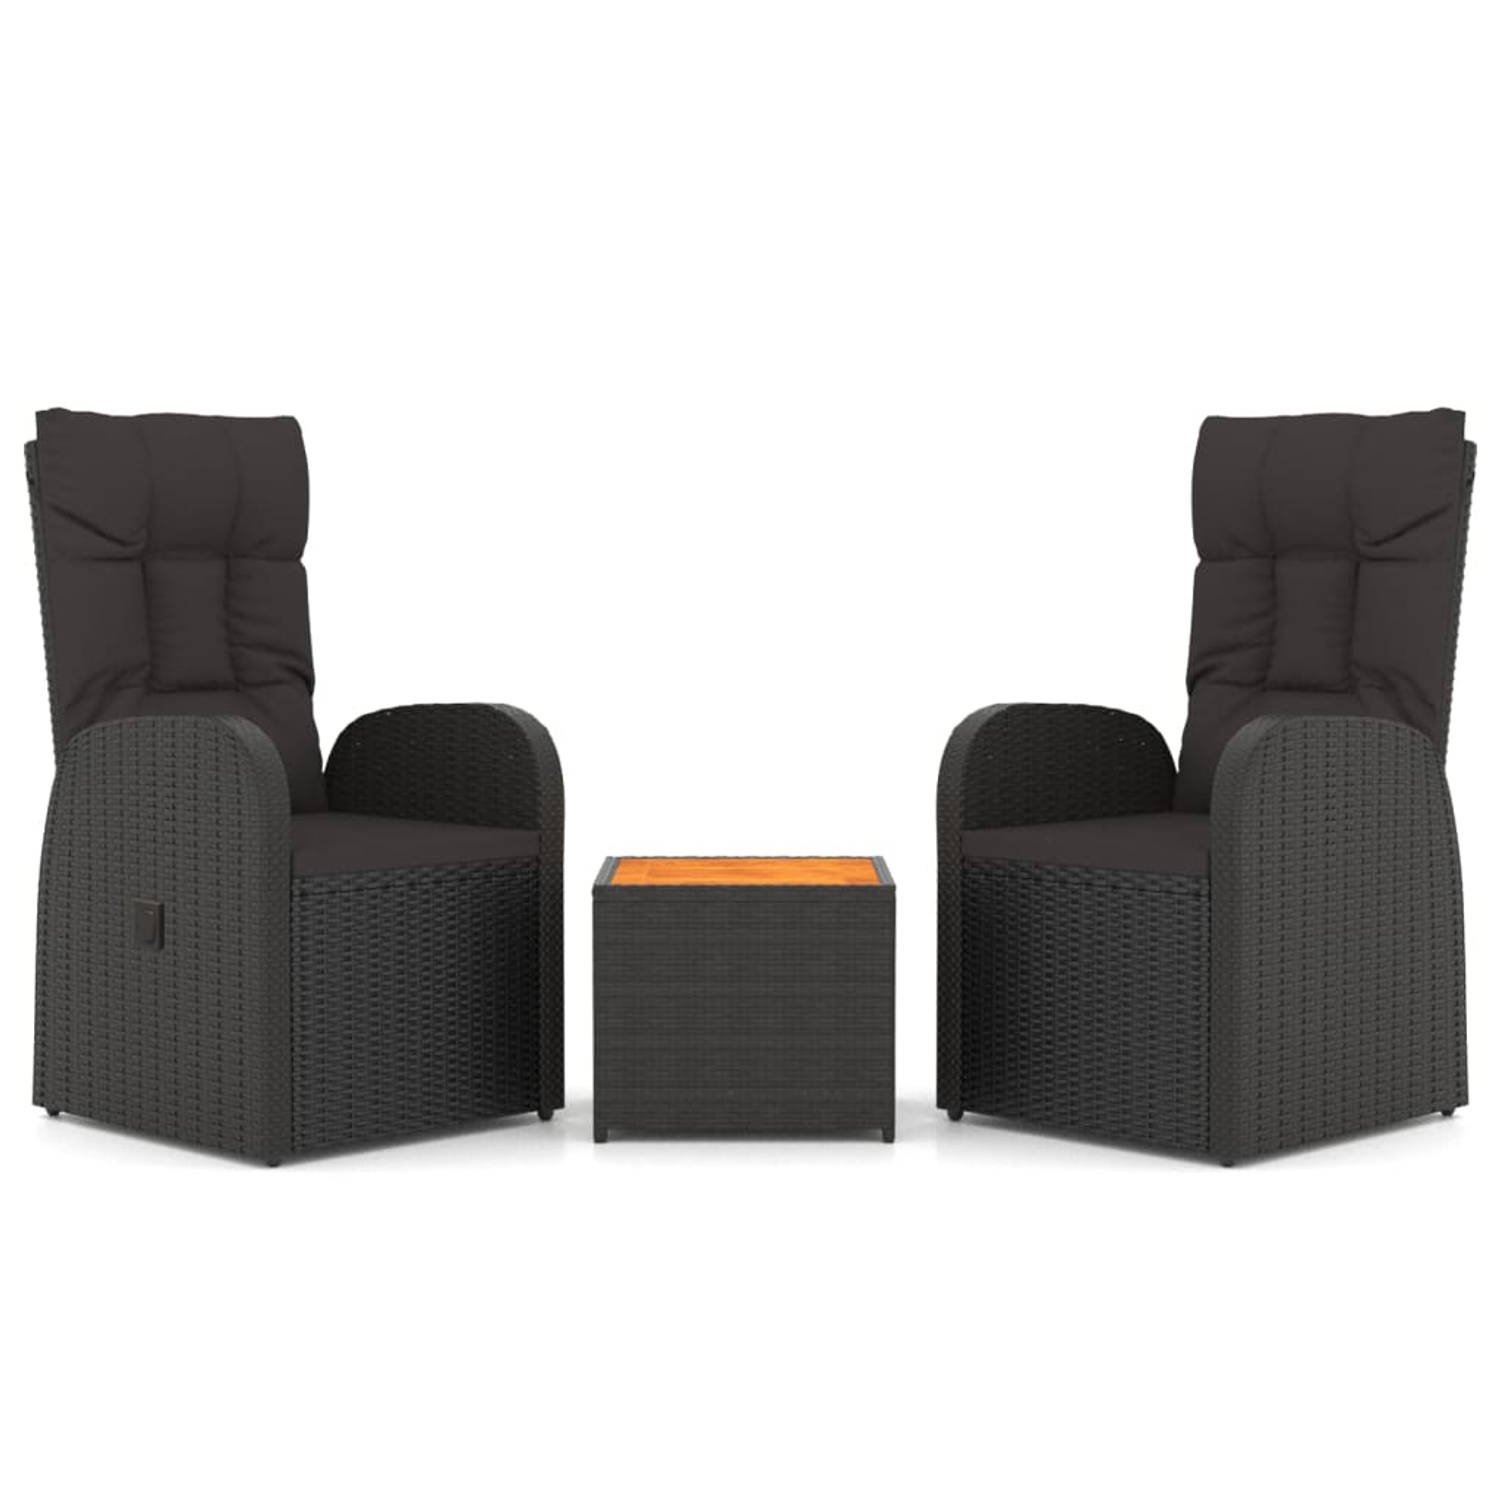 The Living Store 3-delige Loungeset poly rattan en massief acaciahout zwart - Tuinset